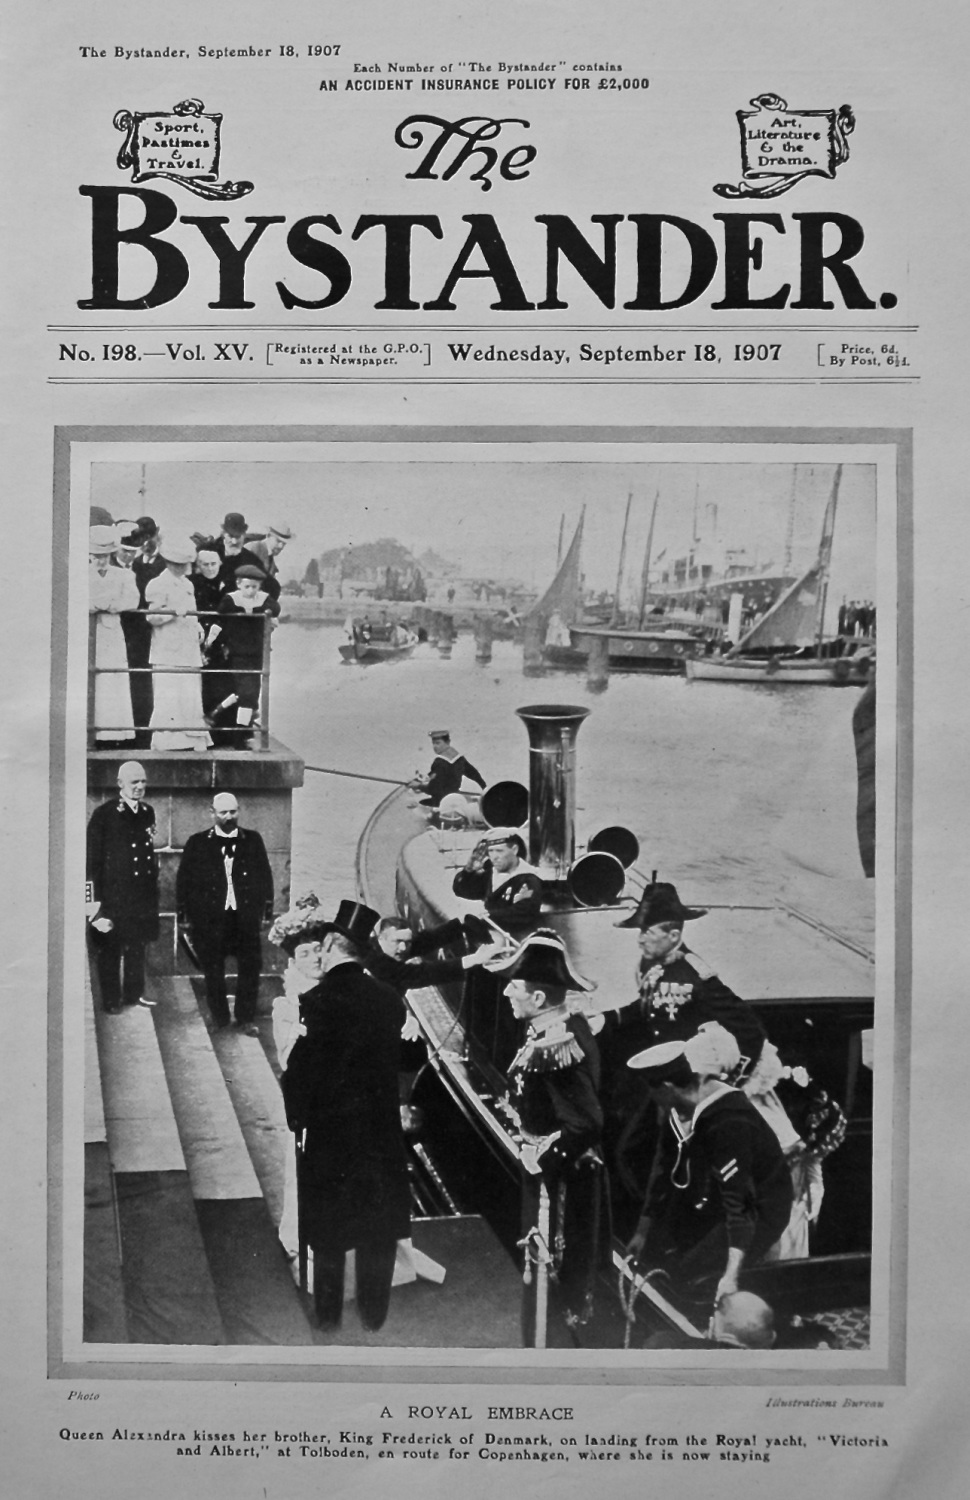 The Bystander. (Front Page). A Royal Embrace.  1907.